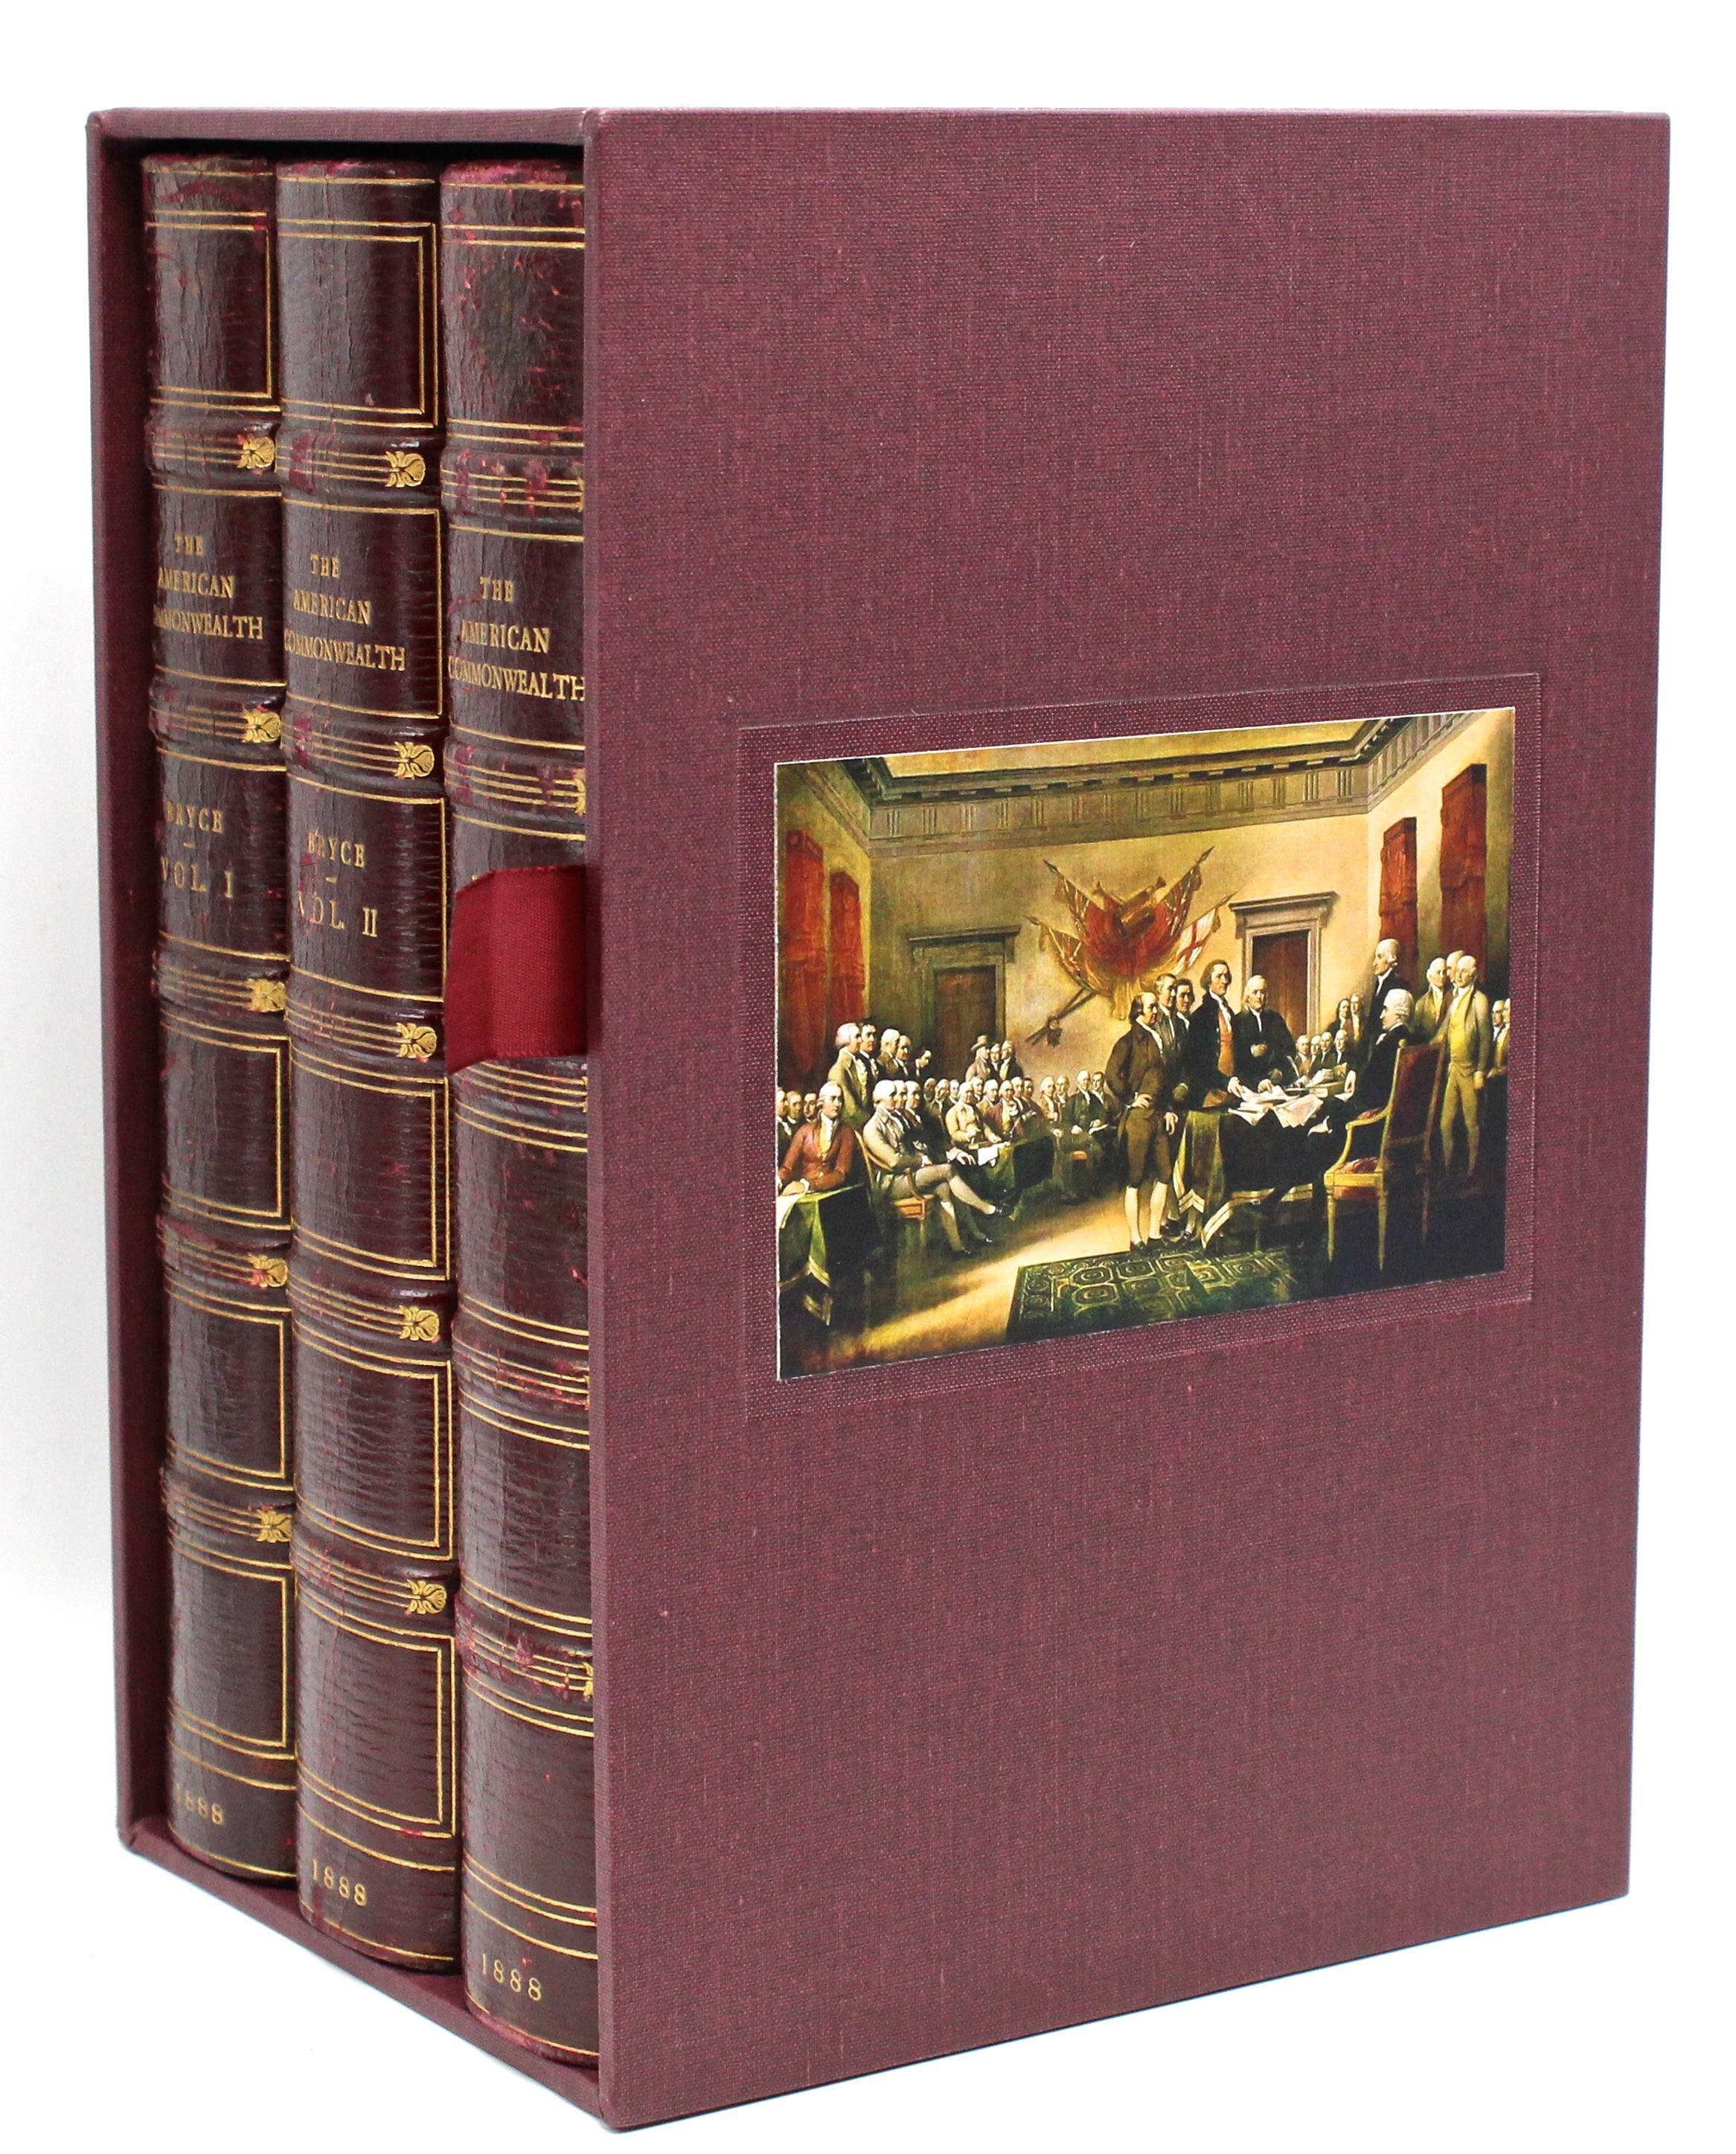 Bryce, James. The American Commonwealth. London: Macmillian and Co., 1888. First edition three volume set. Three-quarter morocco leather boards with deckled edges. Presented in custom matching slipcase.

This first edition, three volume set of The